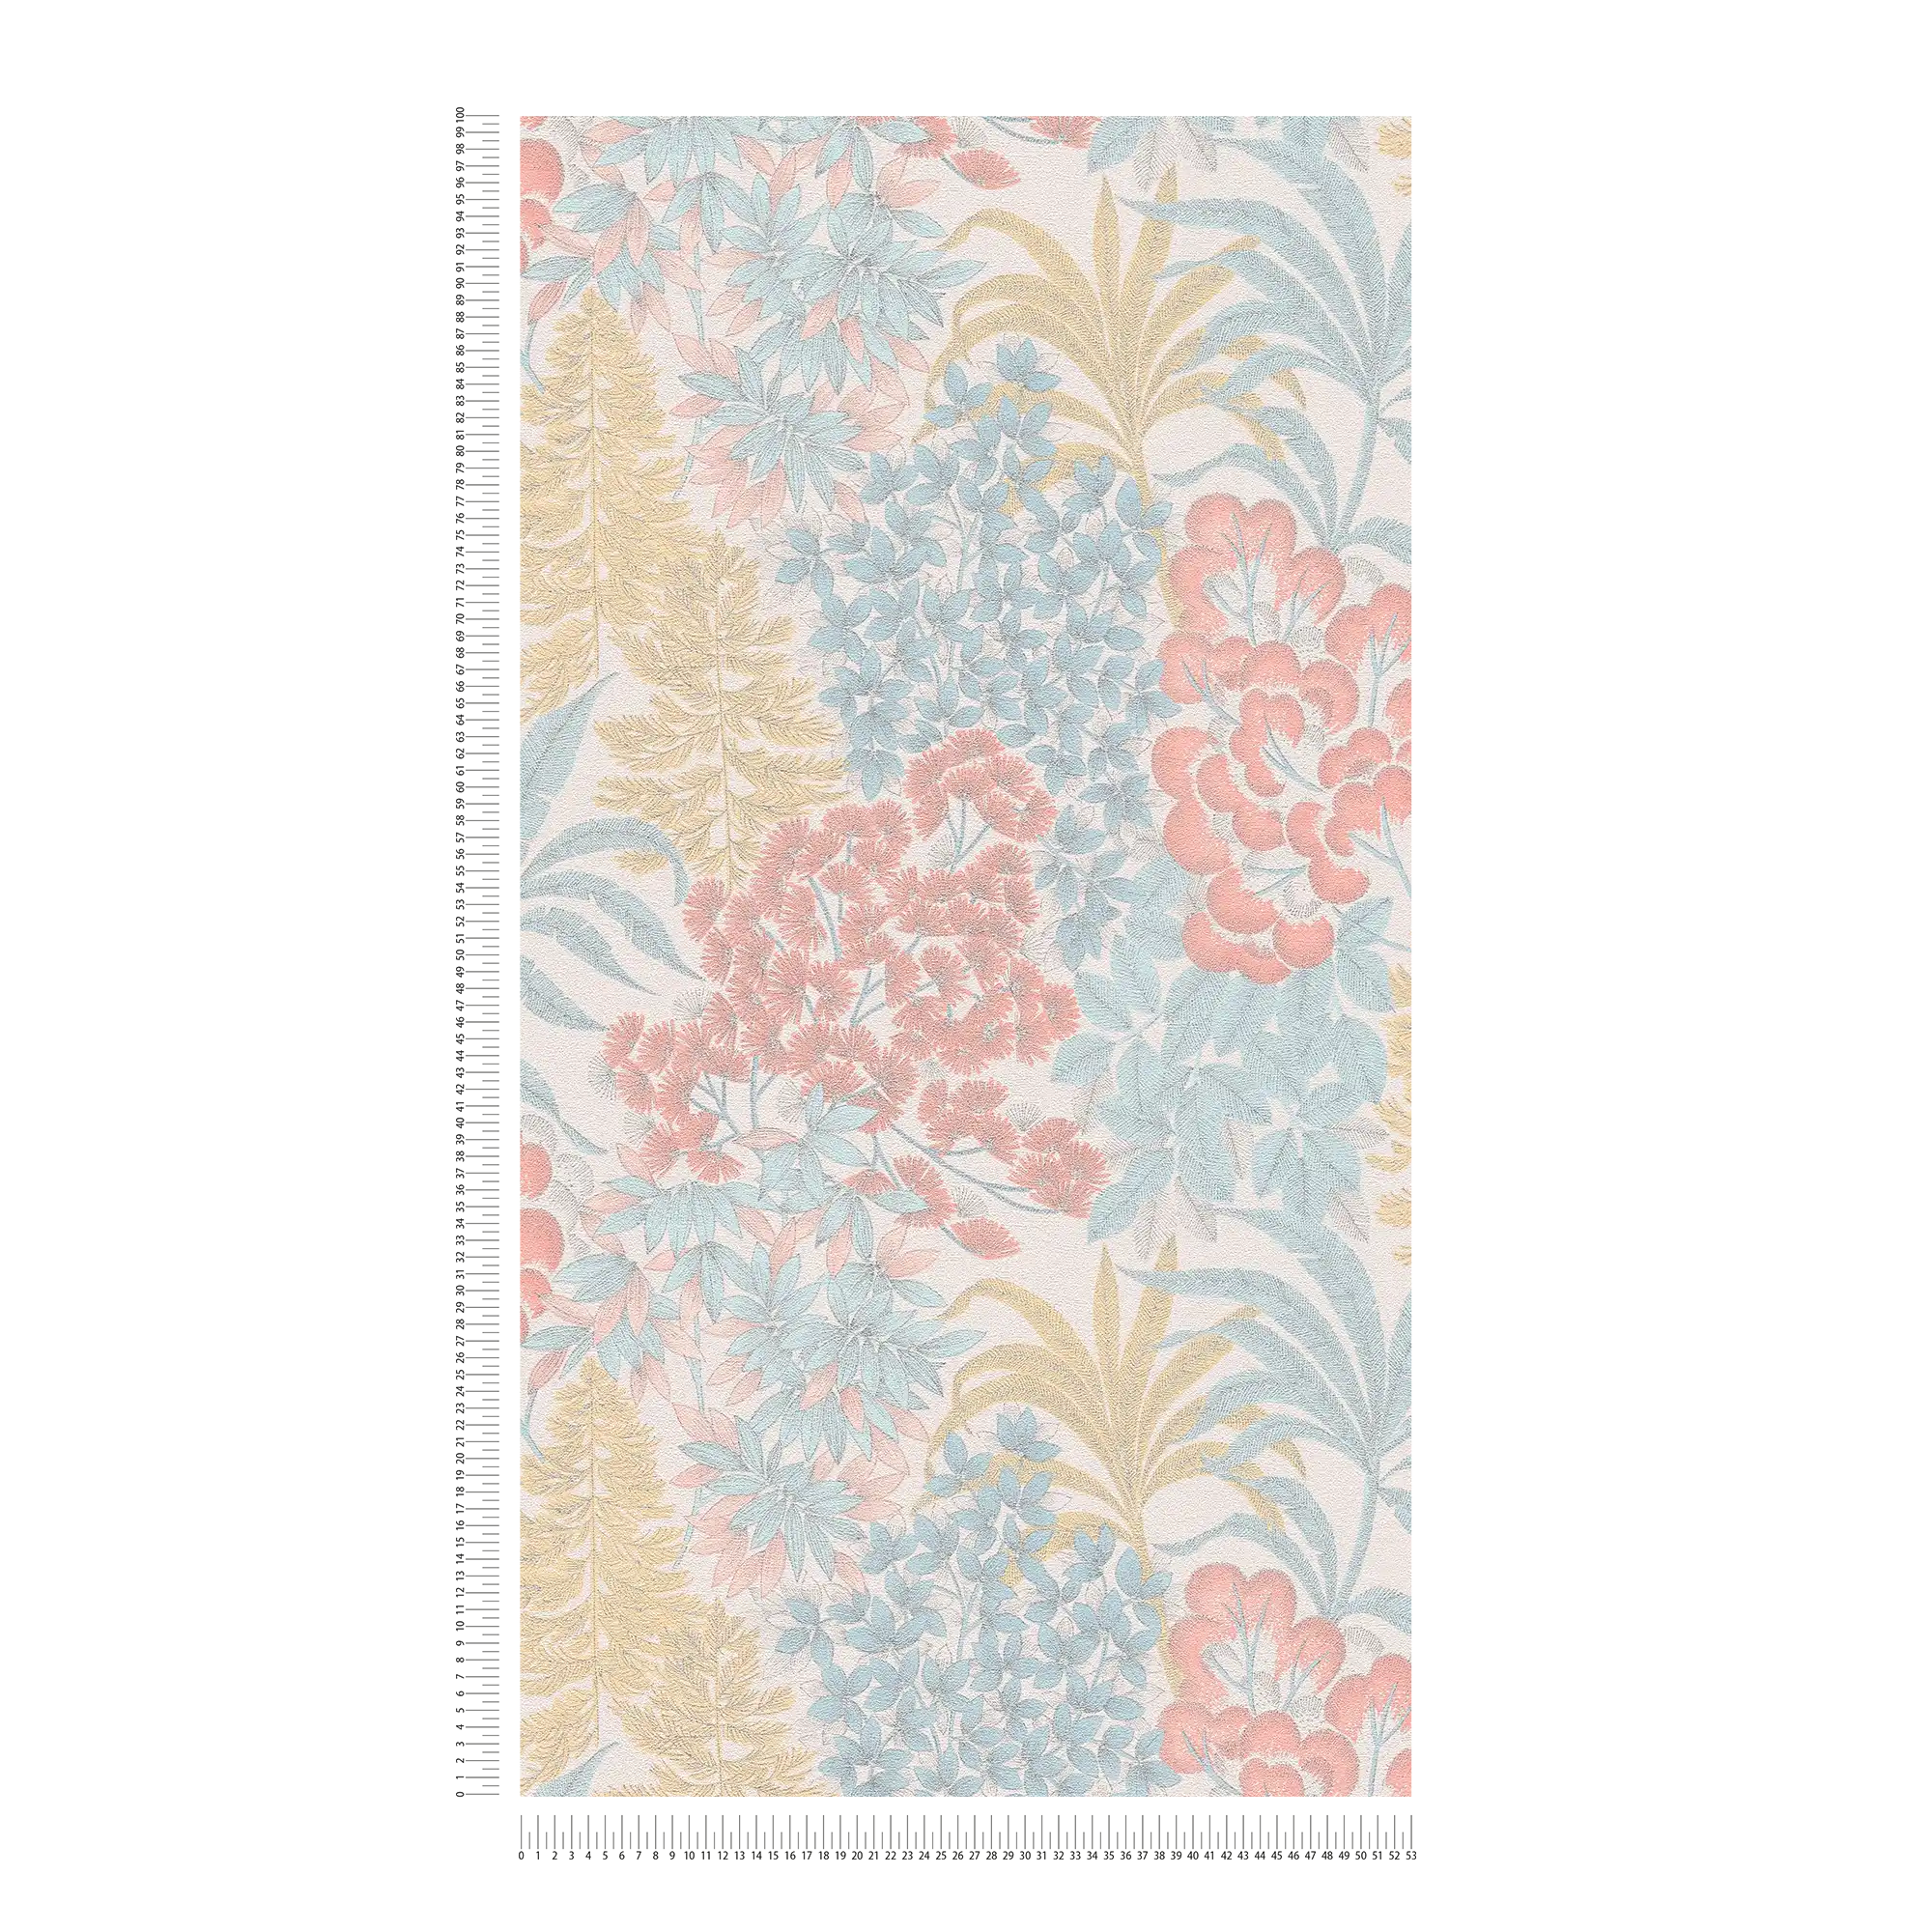             Light glossy floral wallpaper in light colour - white, blue, yellow
        